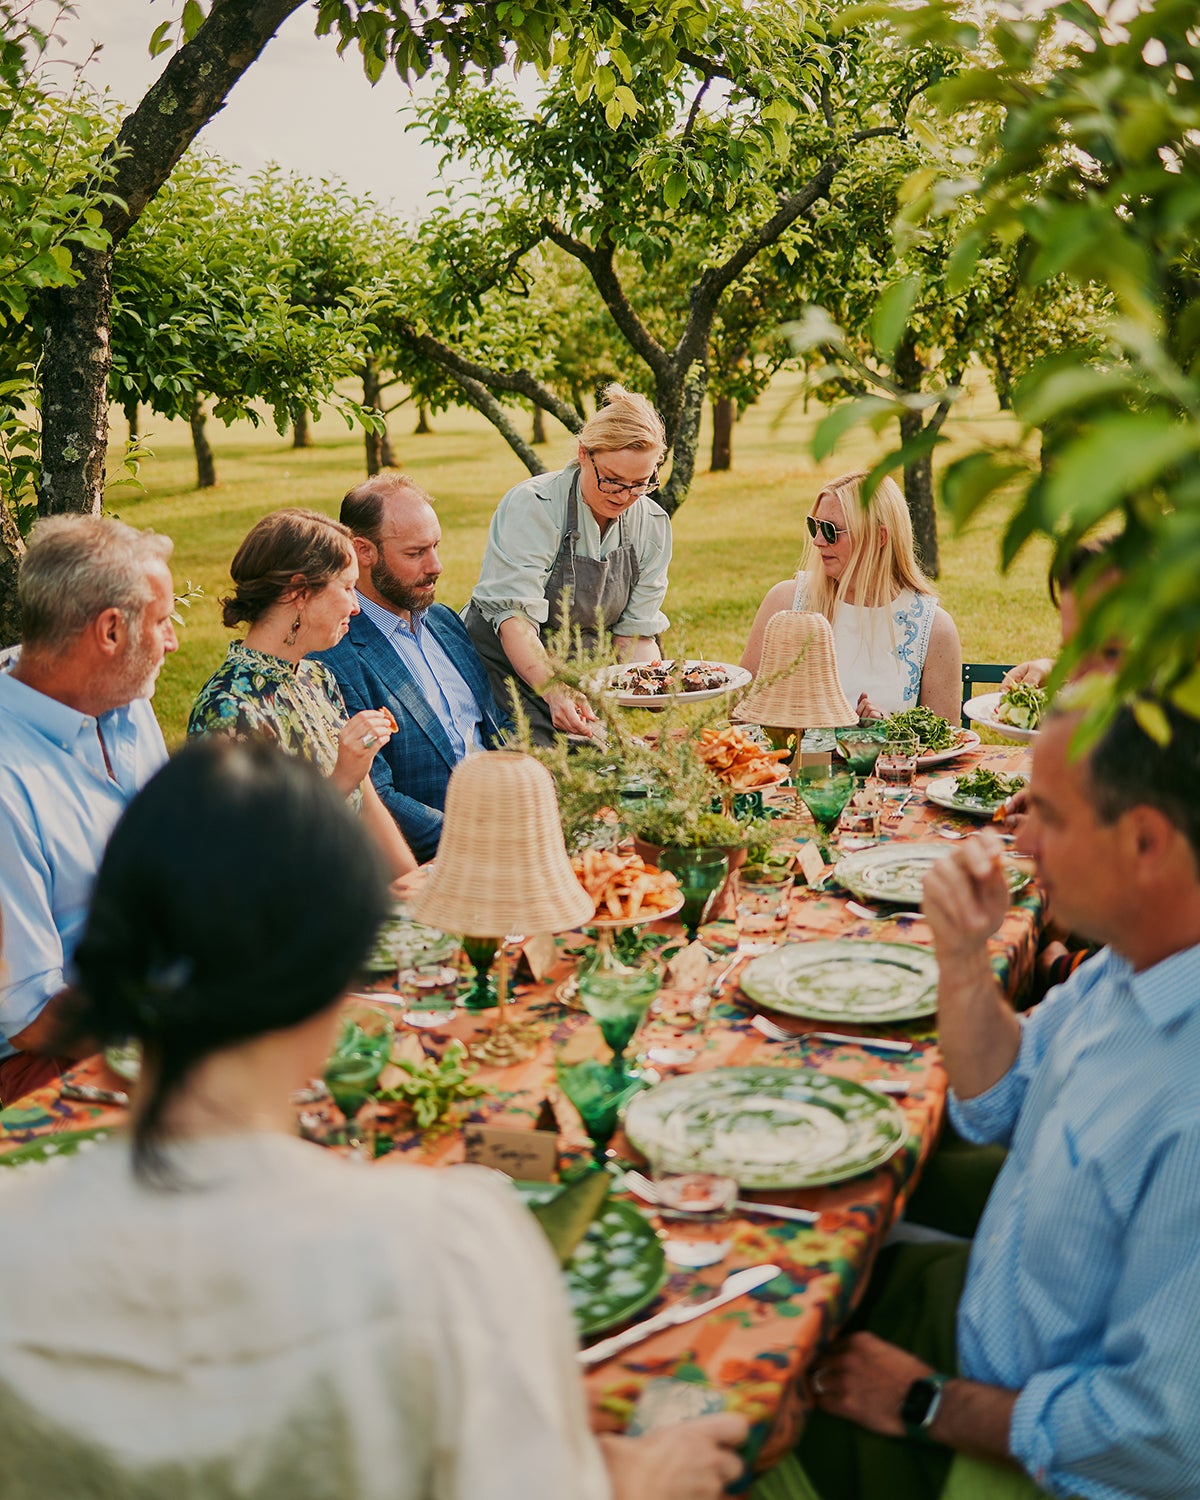 Guests eating at a table in a field